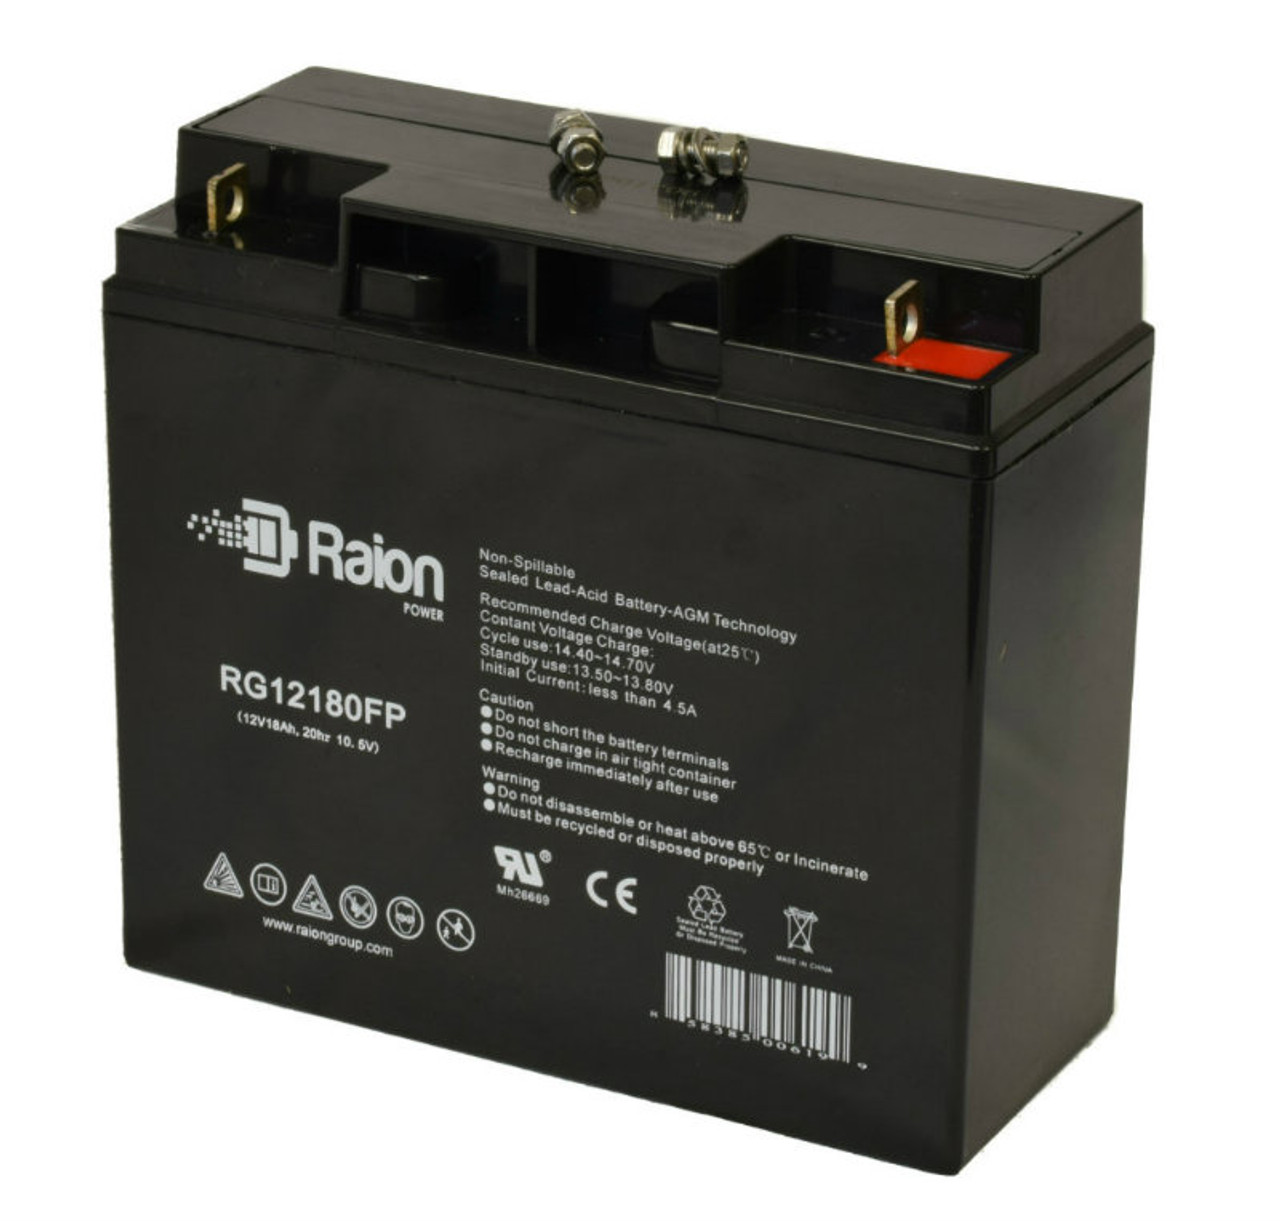 Raion Power Replacement 12V 18Ah Battery for SigmasTek SP12-18 FP - 1 Pack